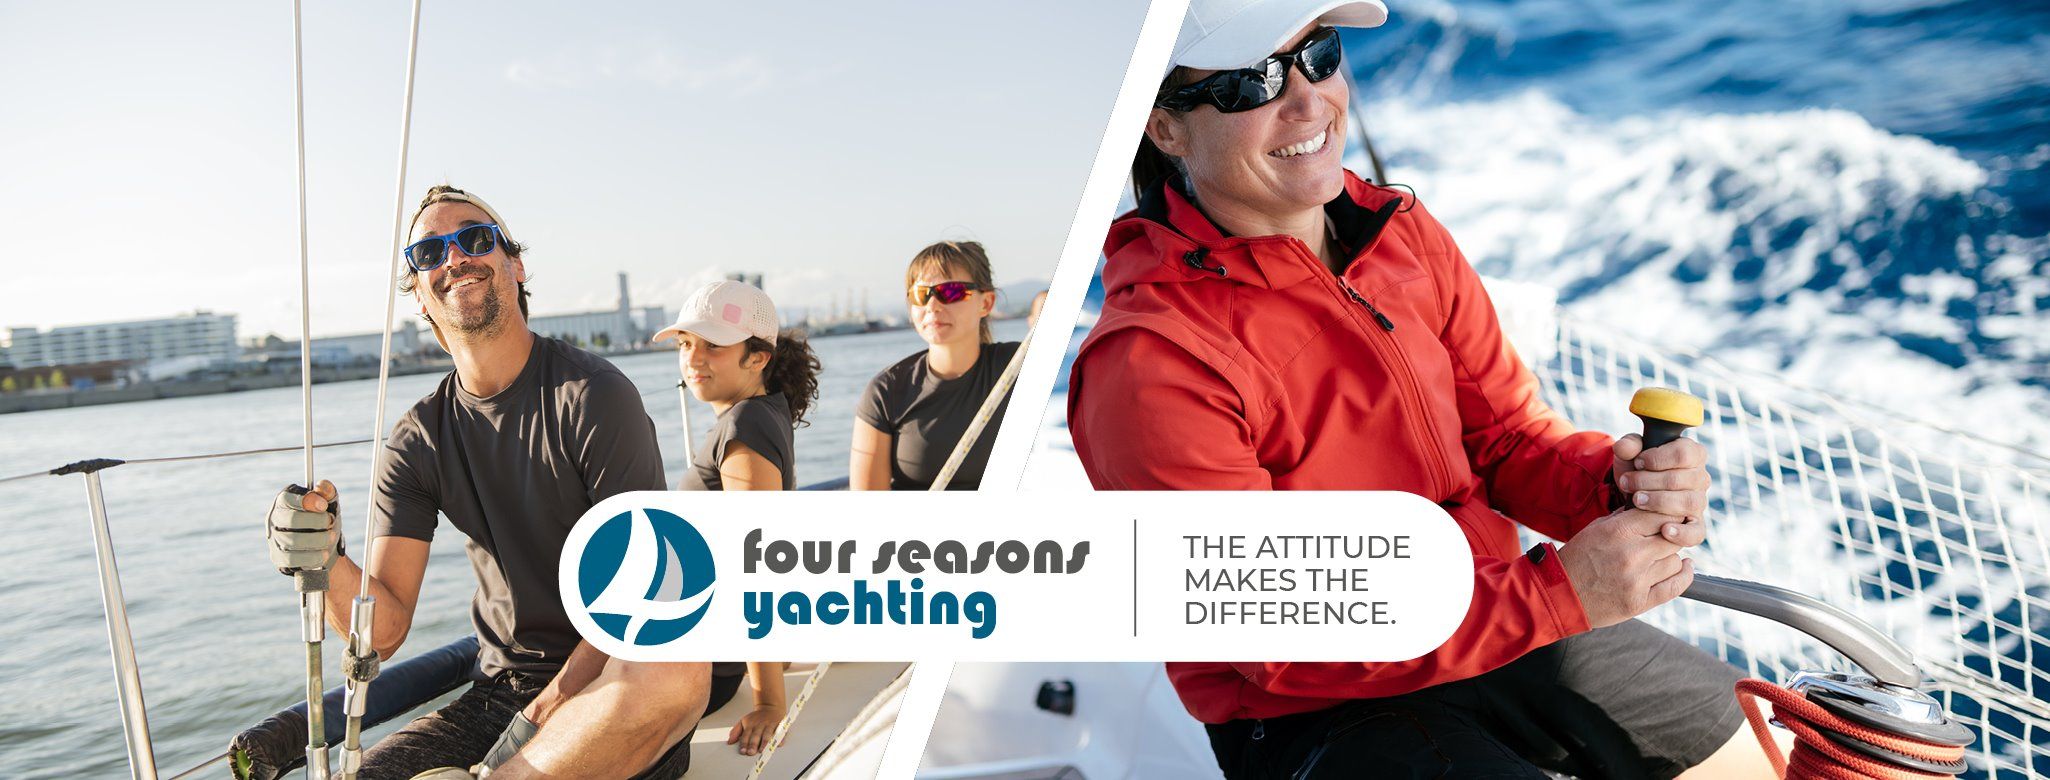 Four Seasons Yachting increases safety with Sailsense Analytics